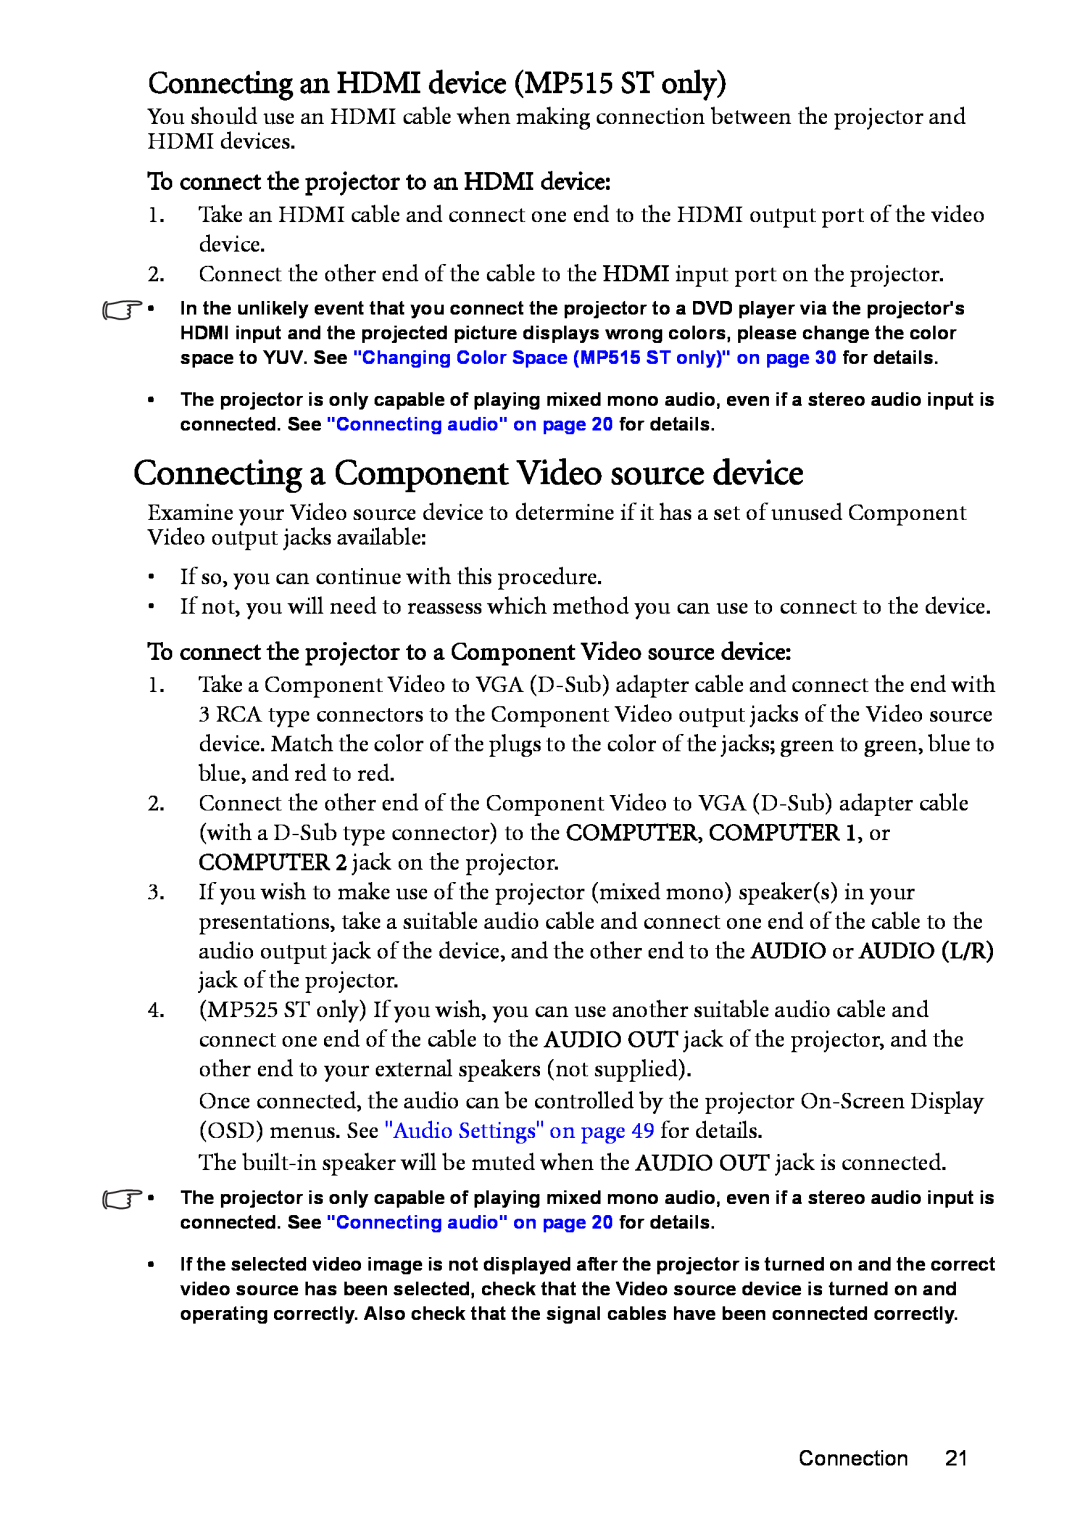 BenQ MP525 ST user manual Connecting a Component Video source device, Connecting an HDMI device MP515 ST only 